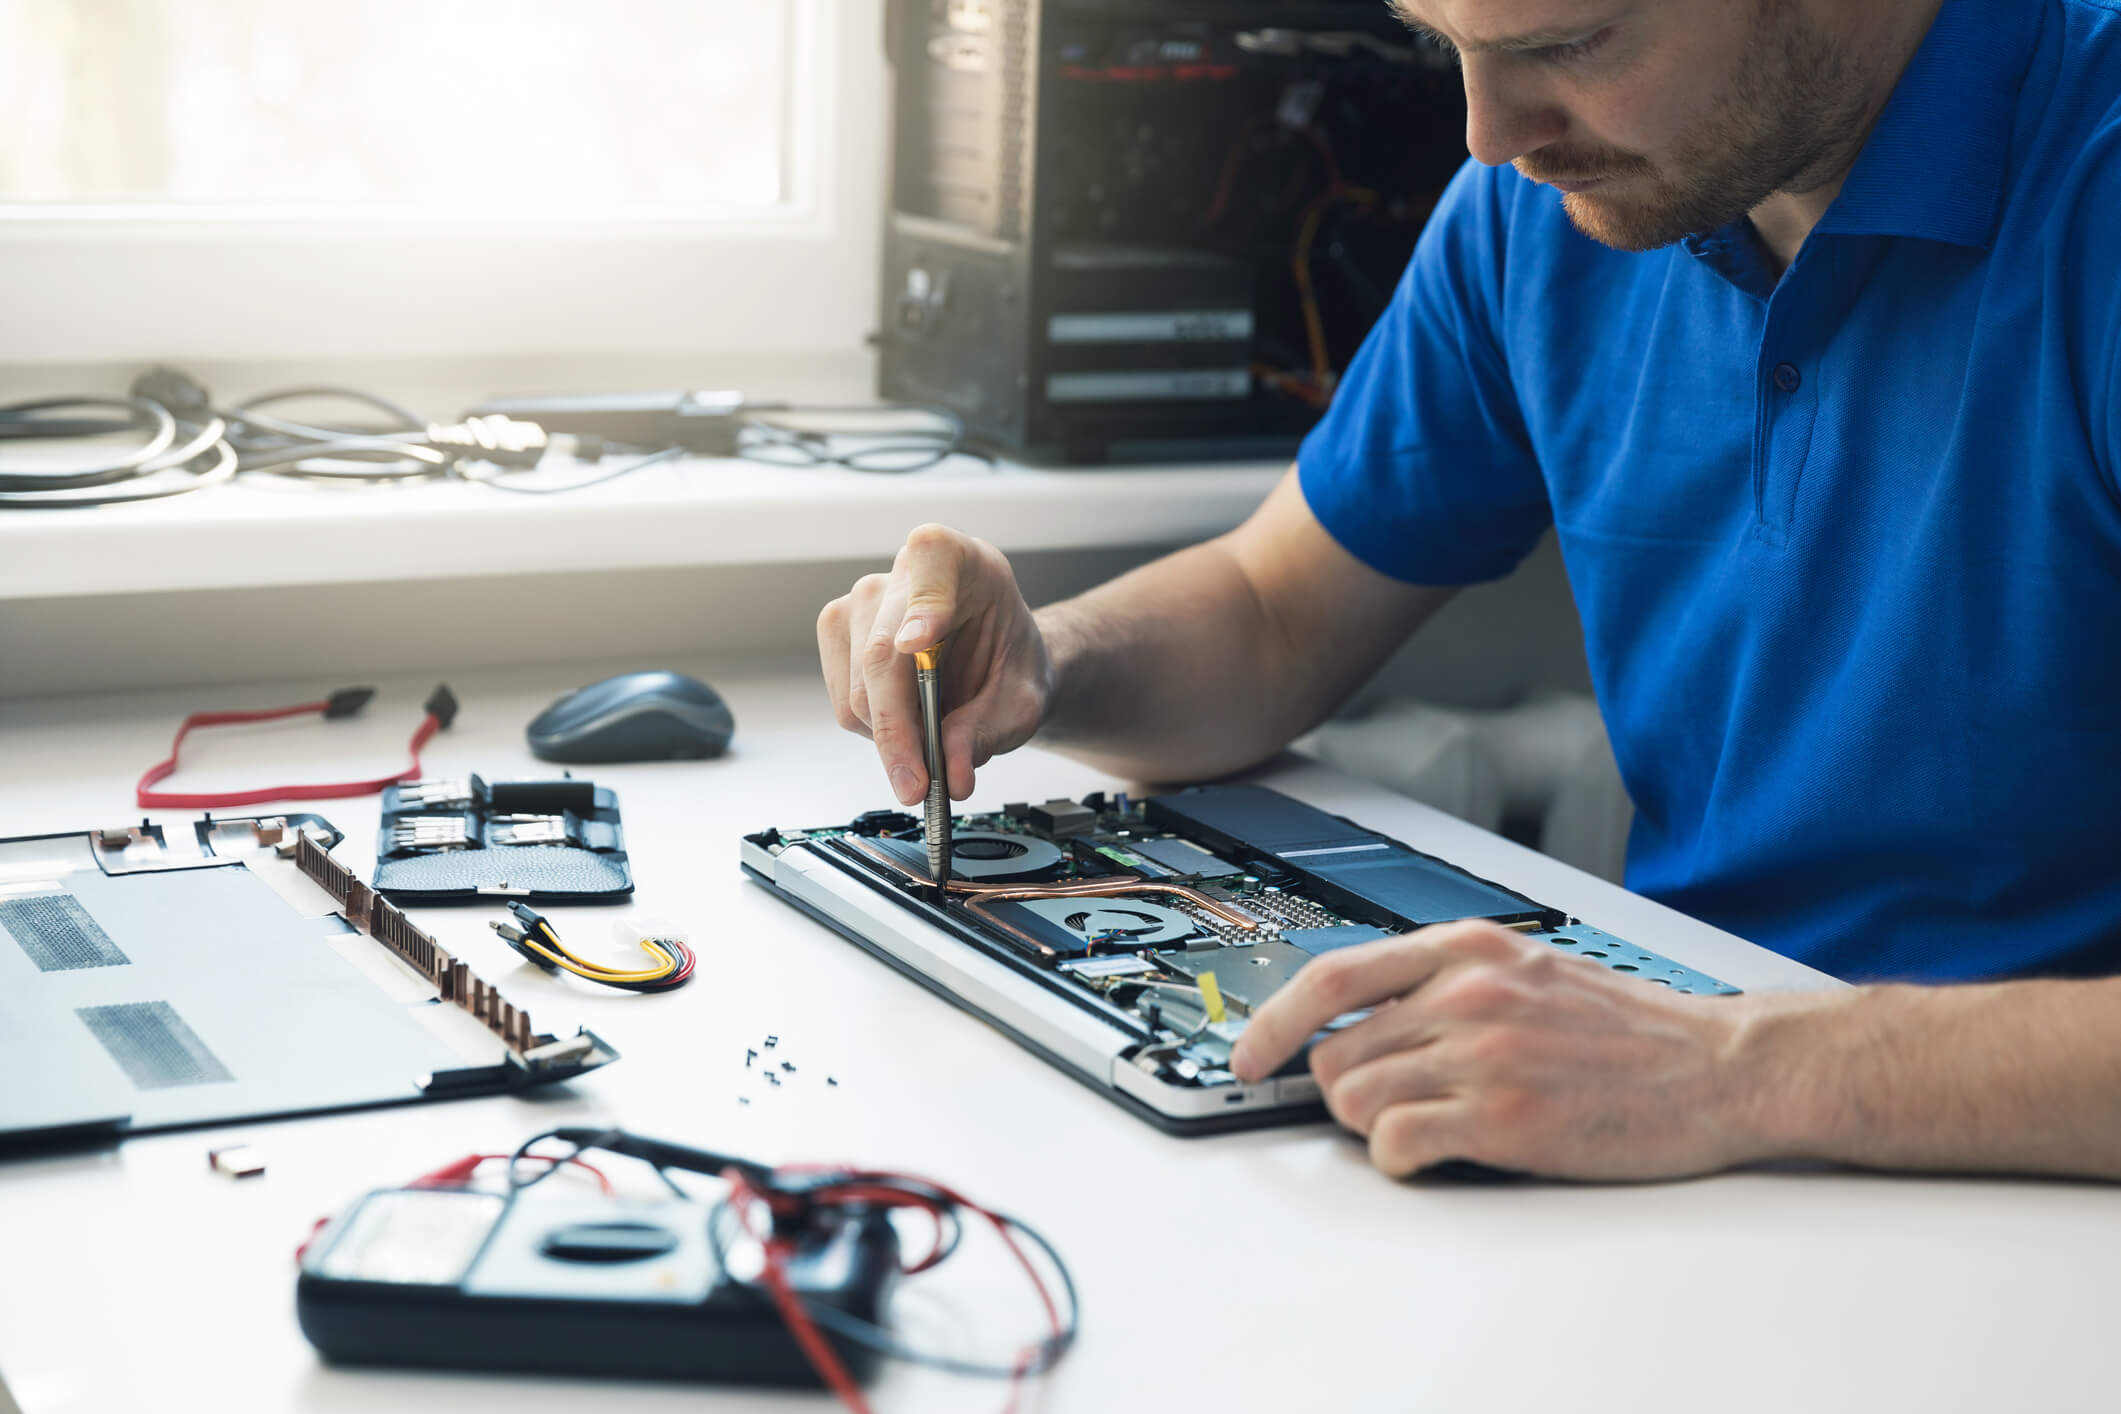 Are you looking for the best Local Computer Repair Technician? Points